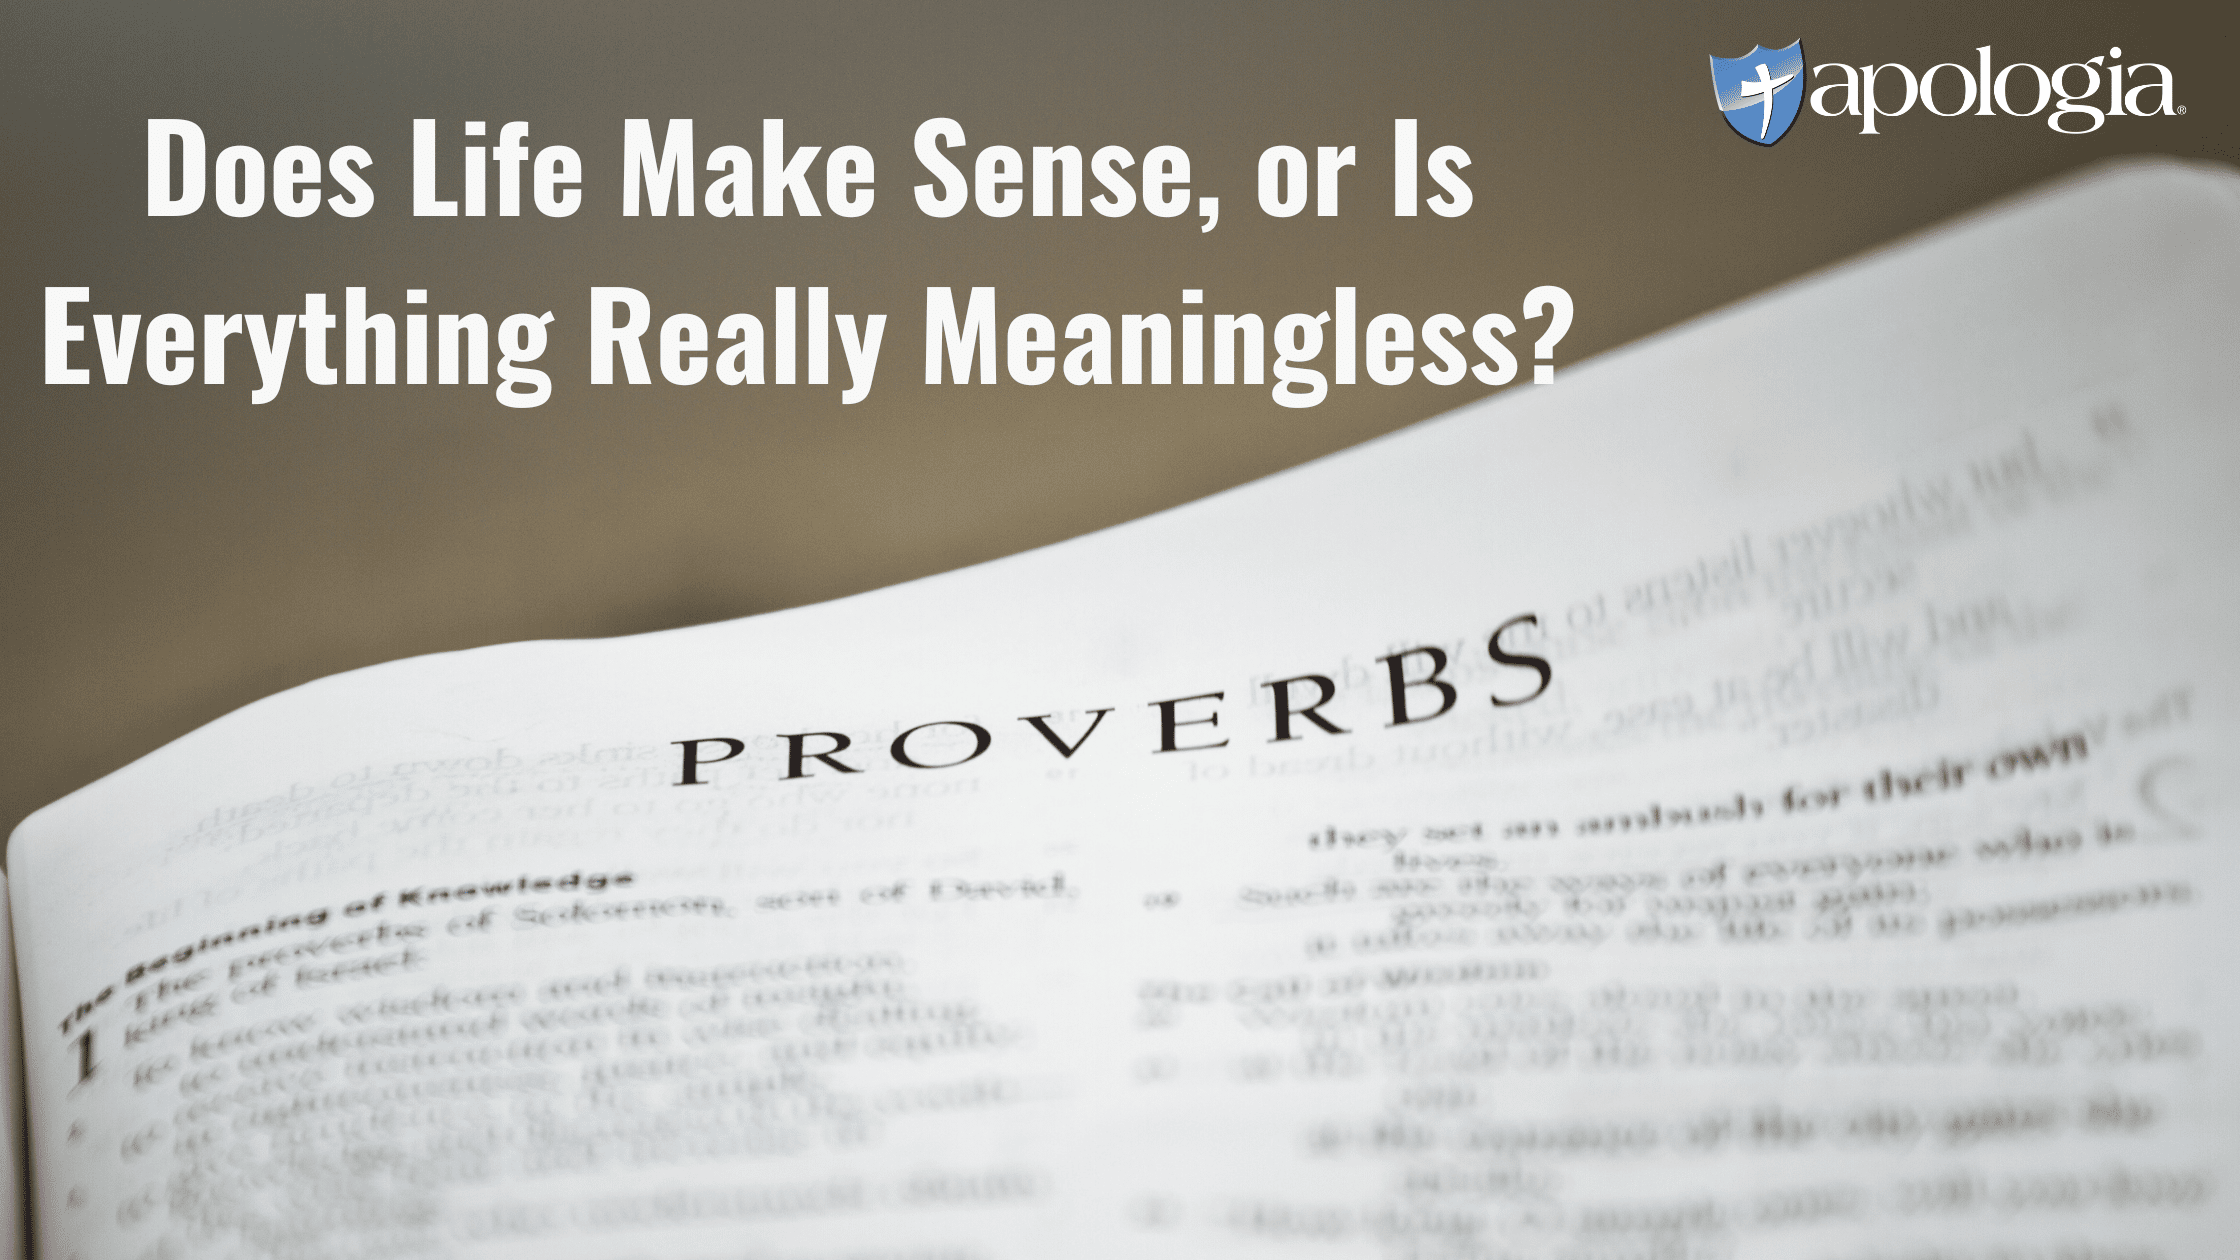 Does Life Make Sense, or Is Everything Really Meaningless